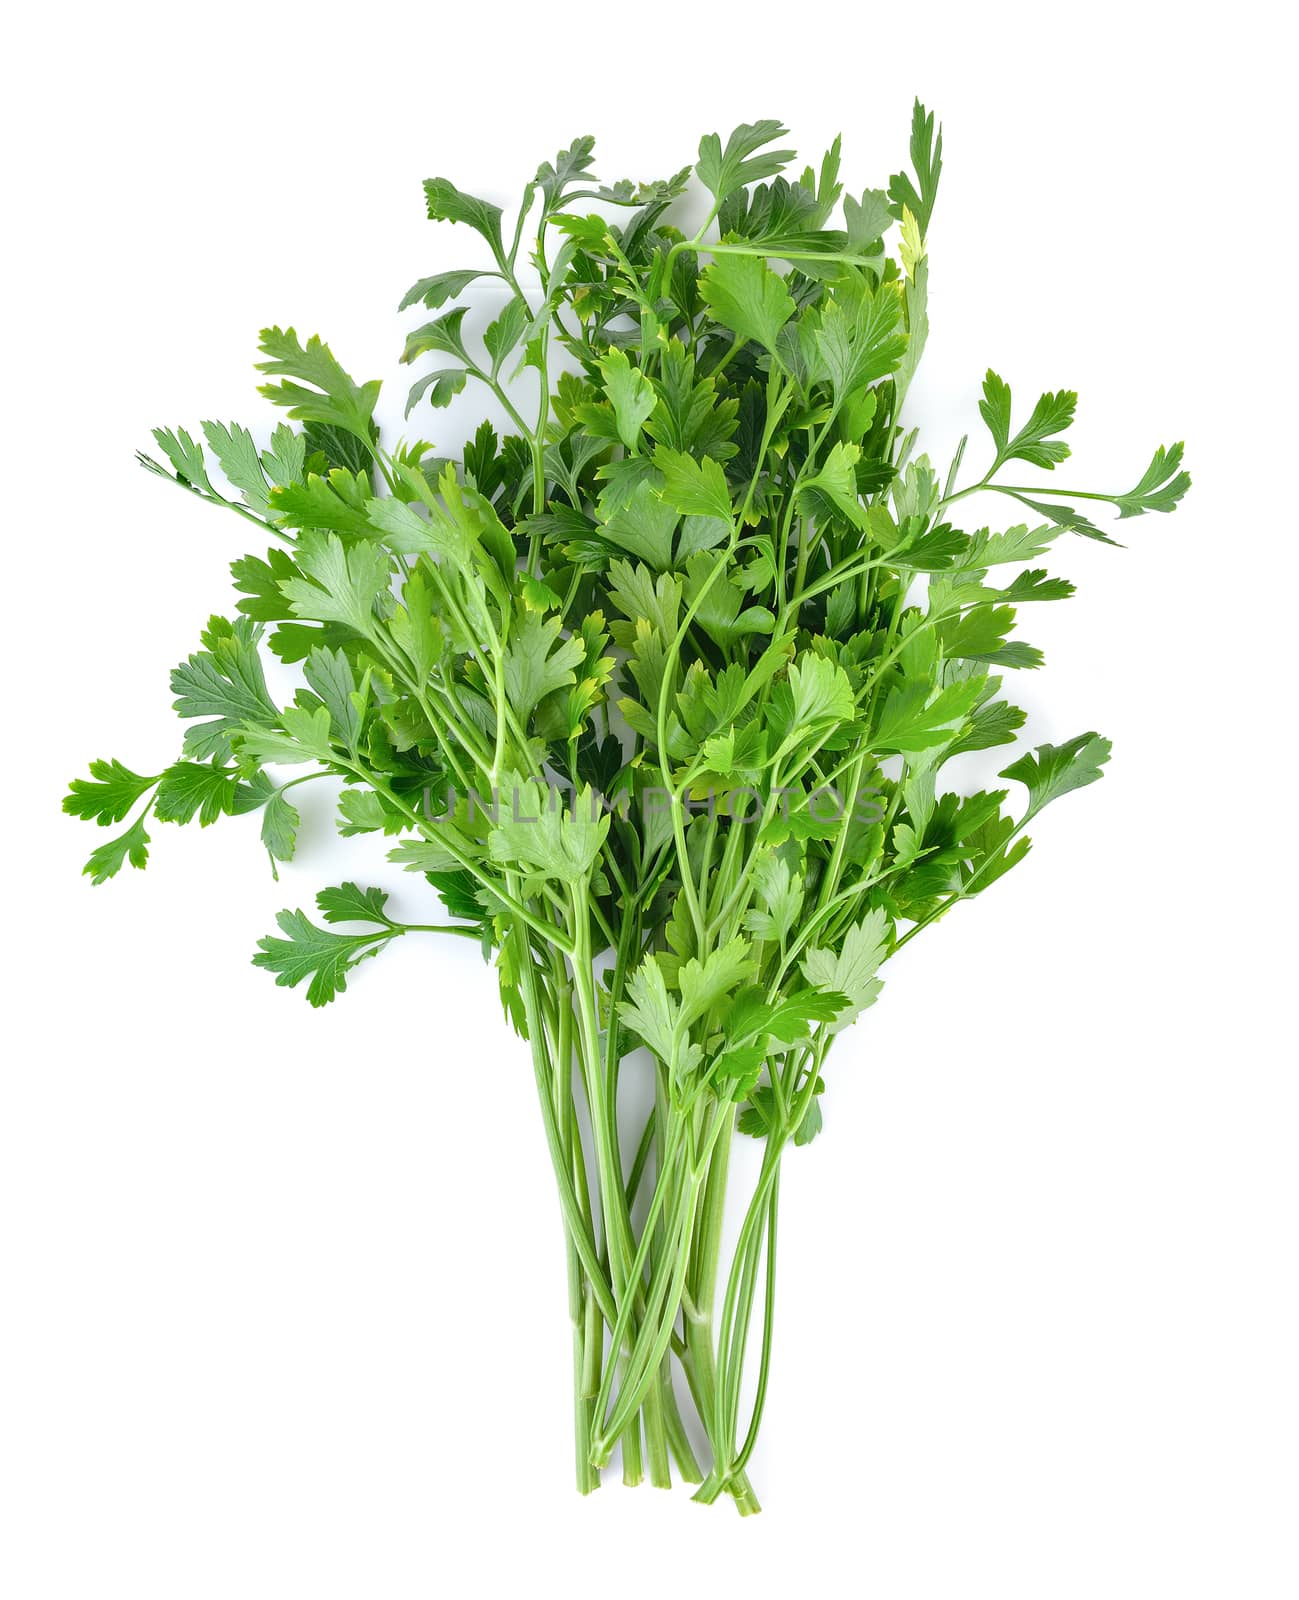 Parsley isolated on white background by sommai